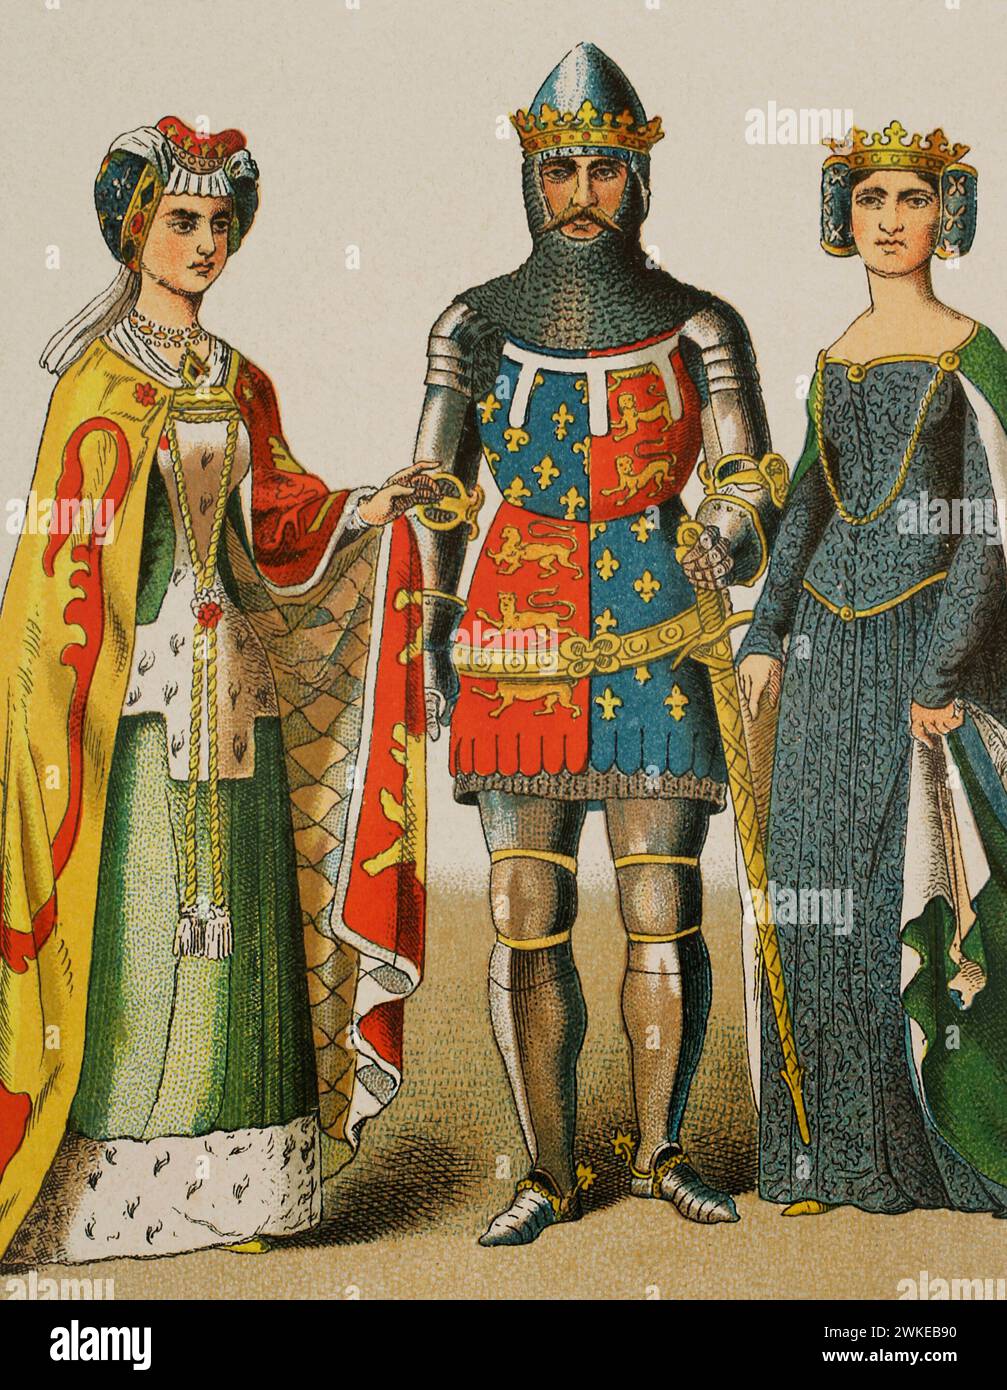 History of England. 14th century. From left to right: lady, Edward of Woodstock (1330-1376), called 'the Black Prince', and Philippa of Hainaut (1314-1369), Queen consort of England (1328-1369). Chromolithography. 'Historia Universal', by César Cantú. Volume VI, 1885. Stock Photo